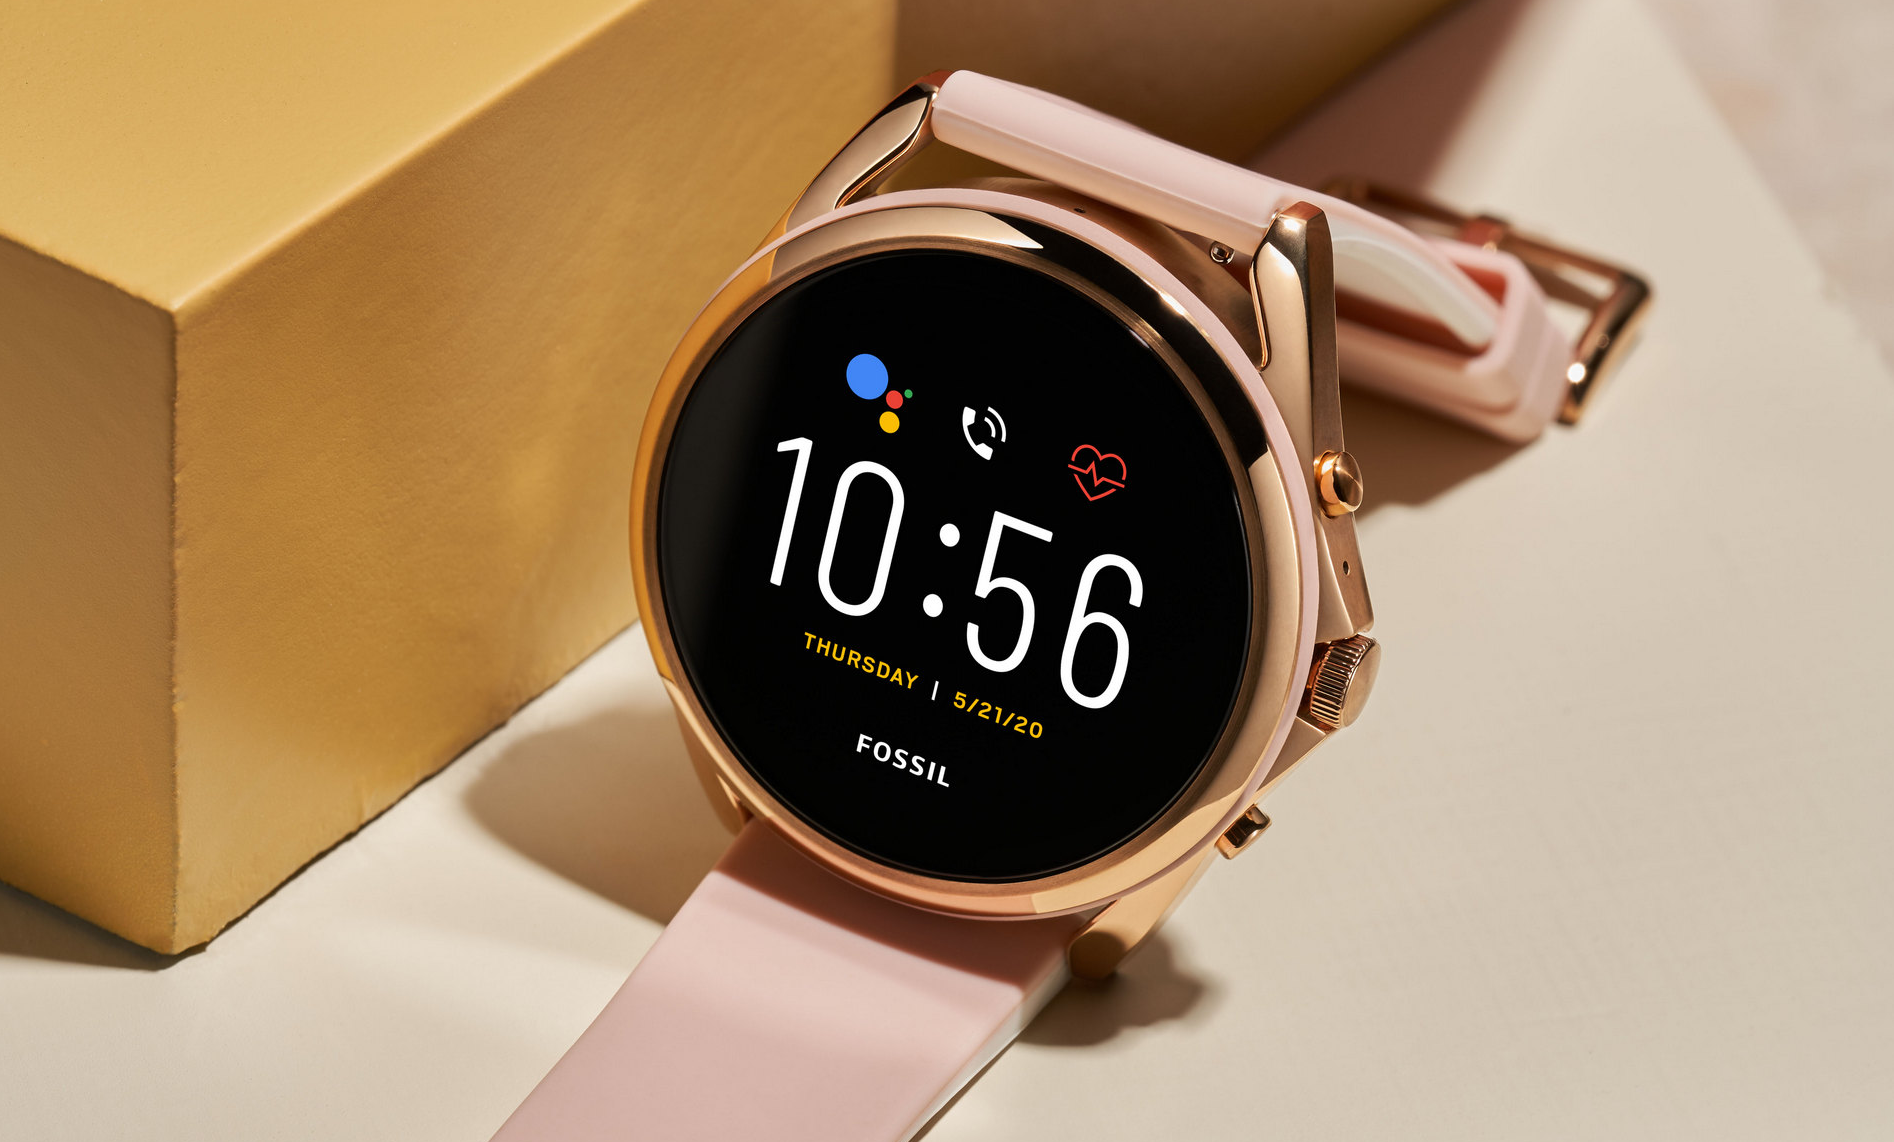 New Fossil Wear OS smartwatches appear at the FCC, likely the Fossil Gen 6 and a Michele or Michael - NotebookCheck.net News